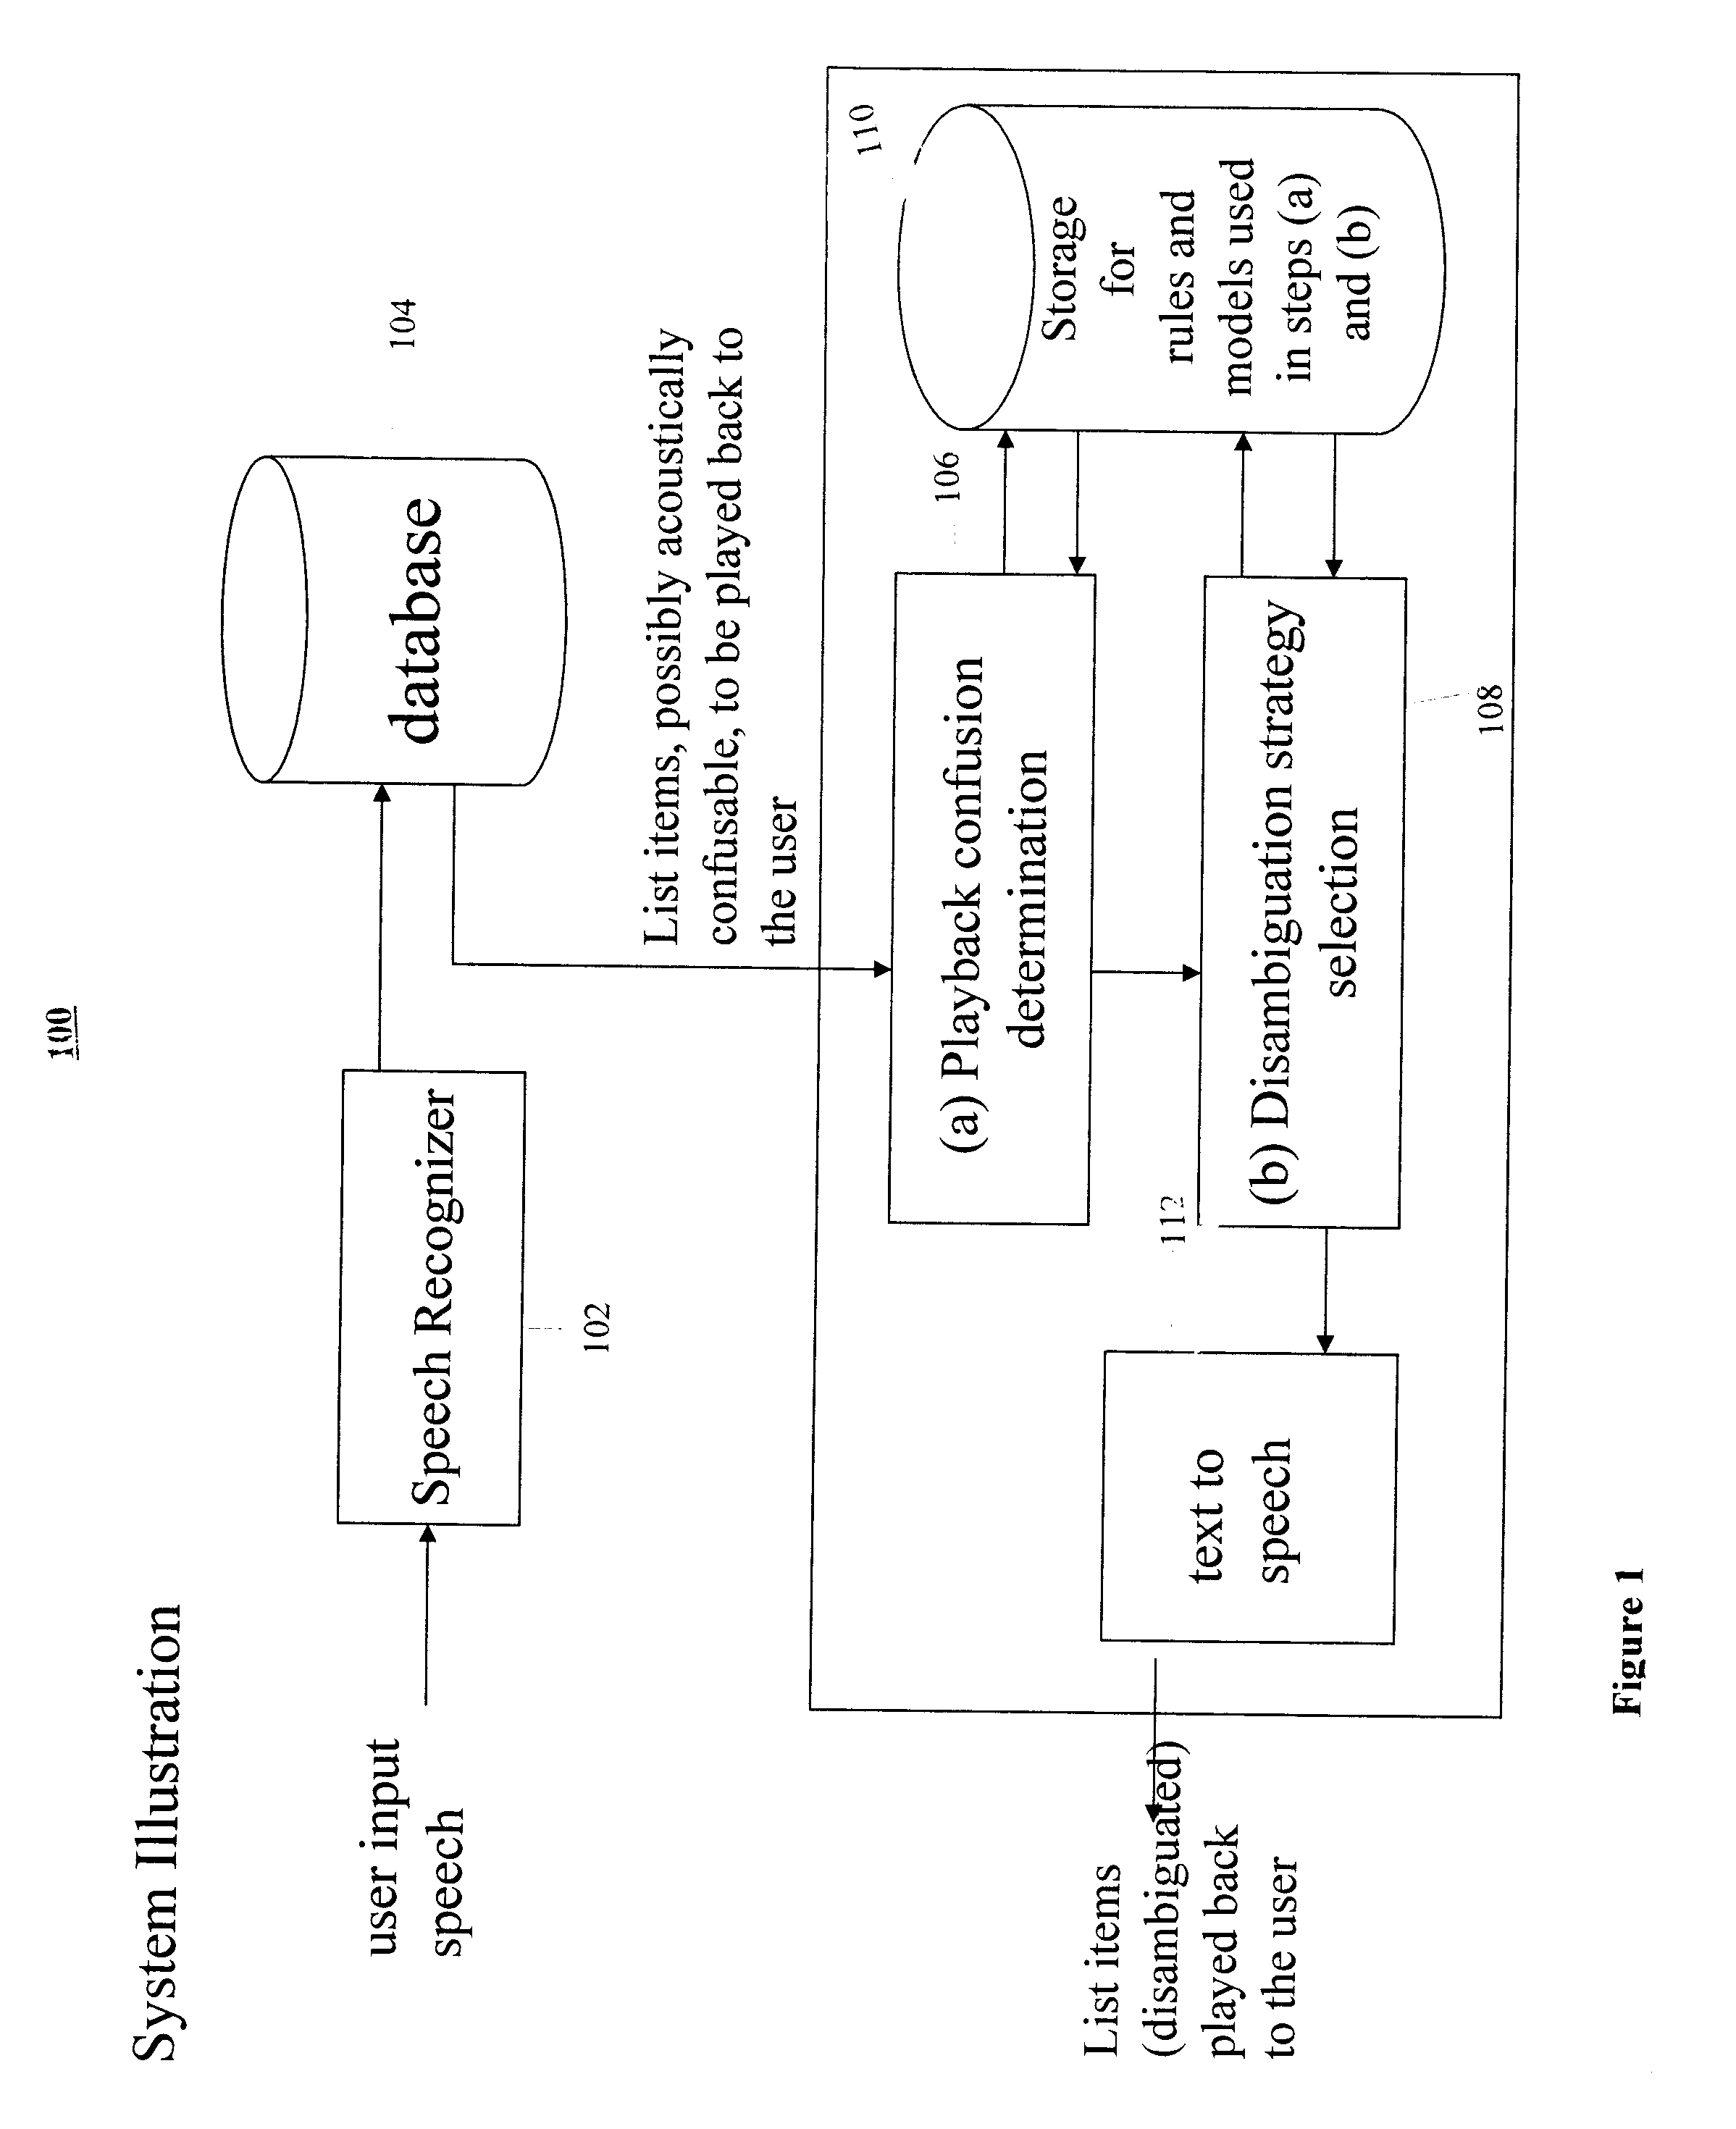 Method and system for prompt construction for selection from a list of acoustically confusable items in spoken dialog systems